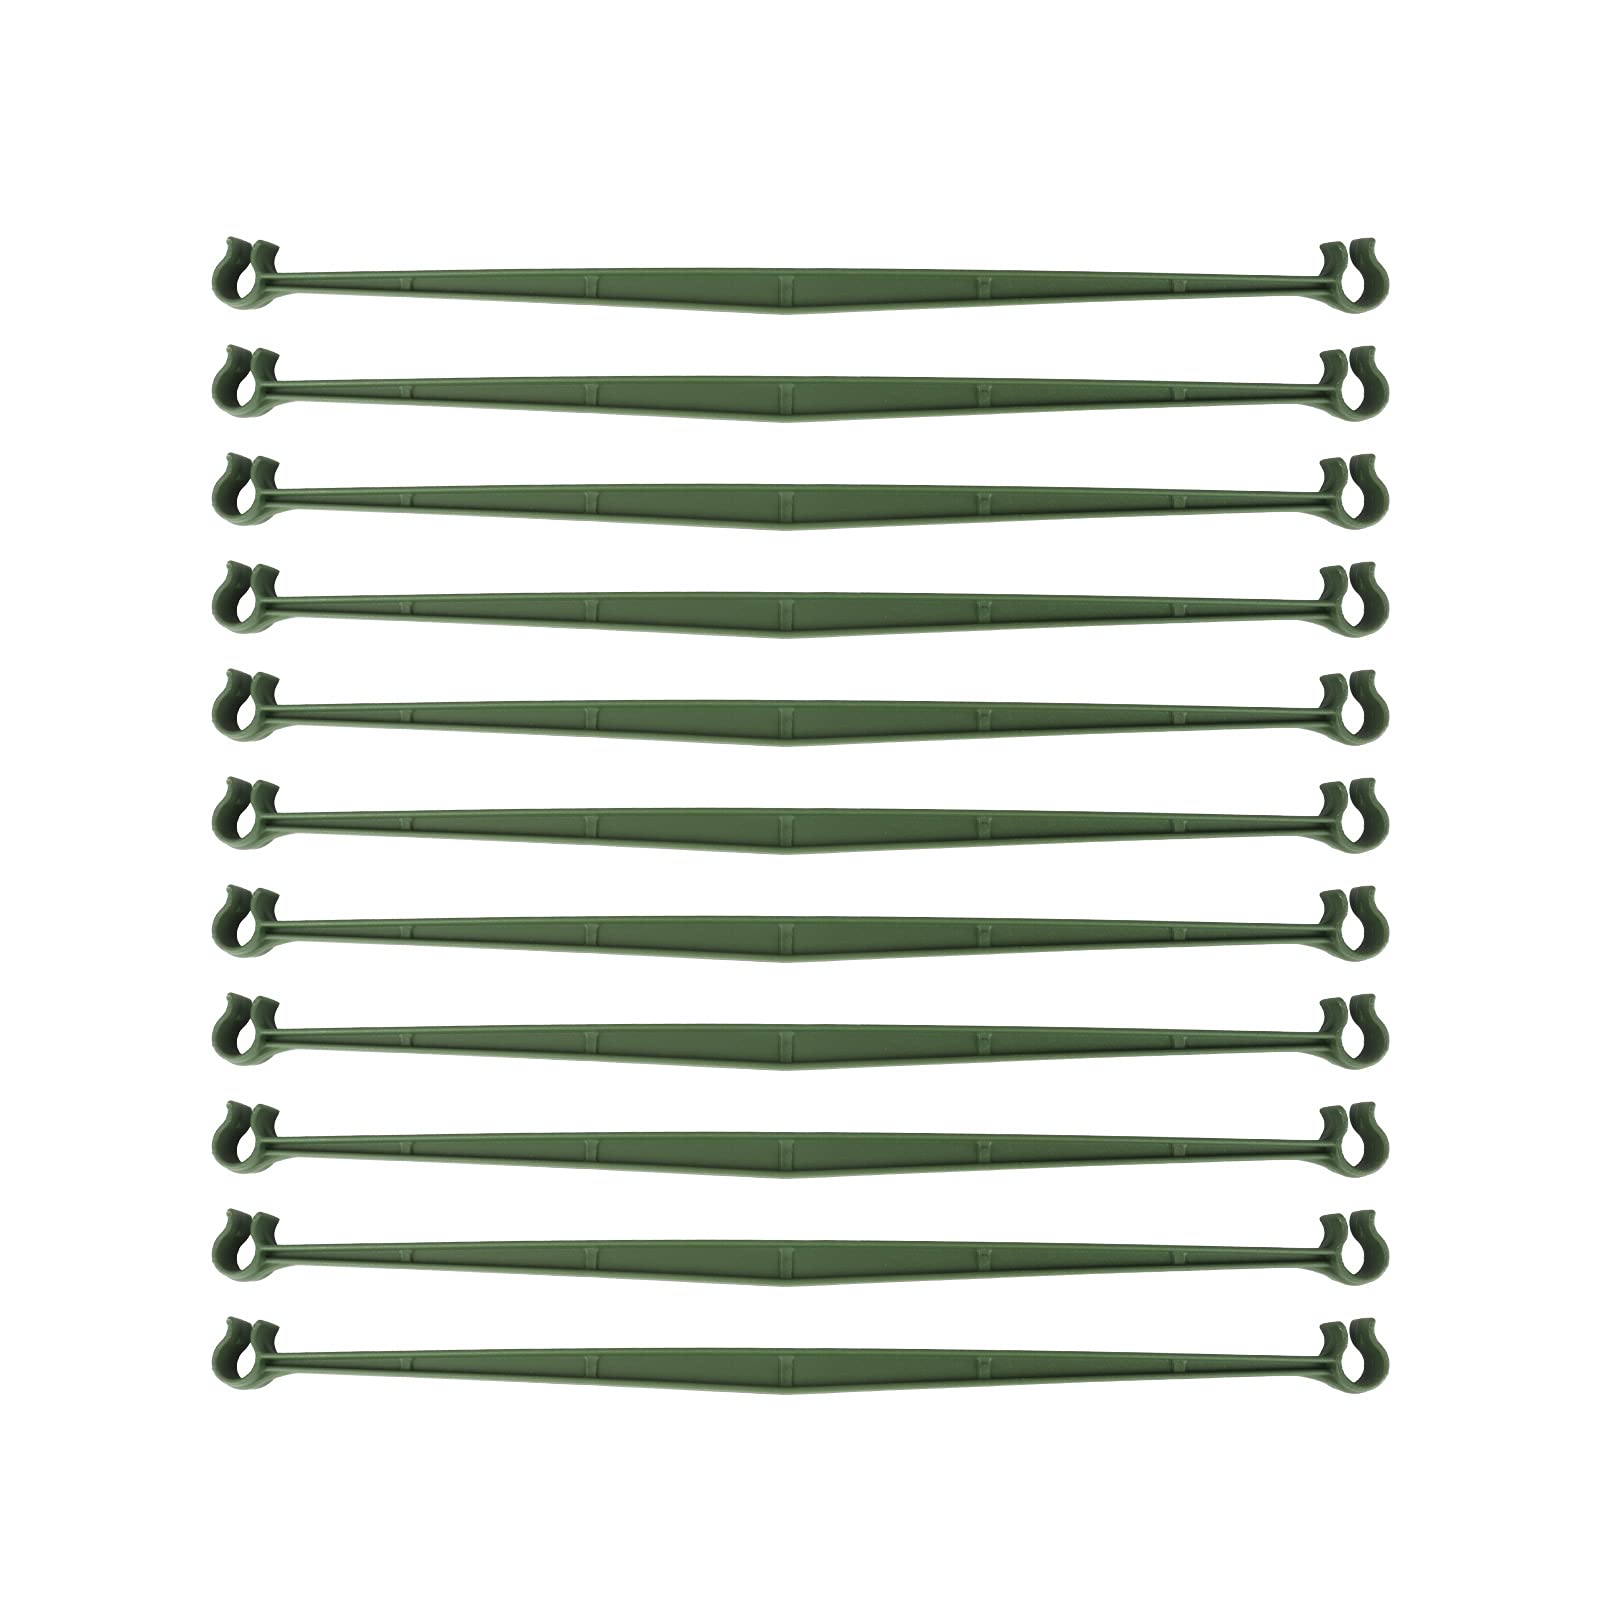 30PCS Stake Arms for Tomato Cage，Expandable Trellis Connectors-11.8" with 2 Buckles for Tomato Cage Attach 11mm Diameter Plant Stakes